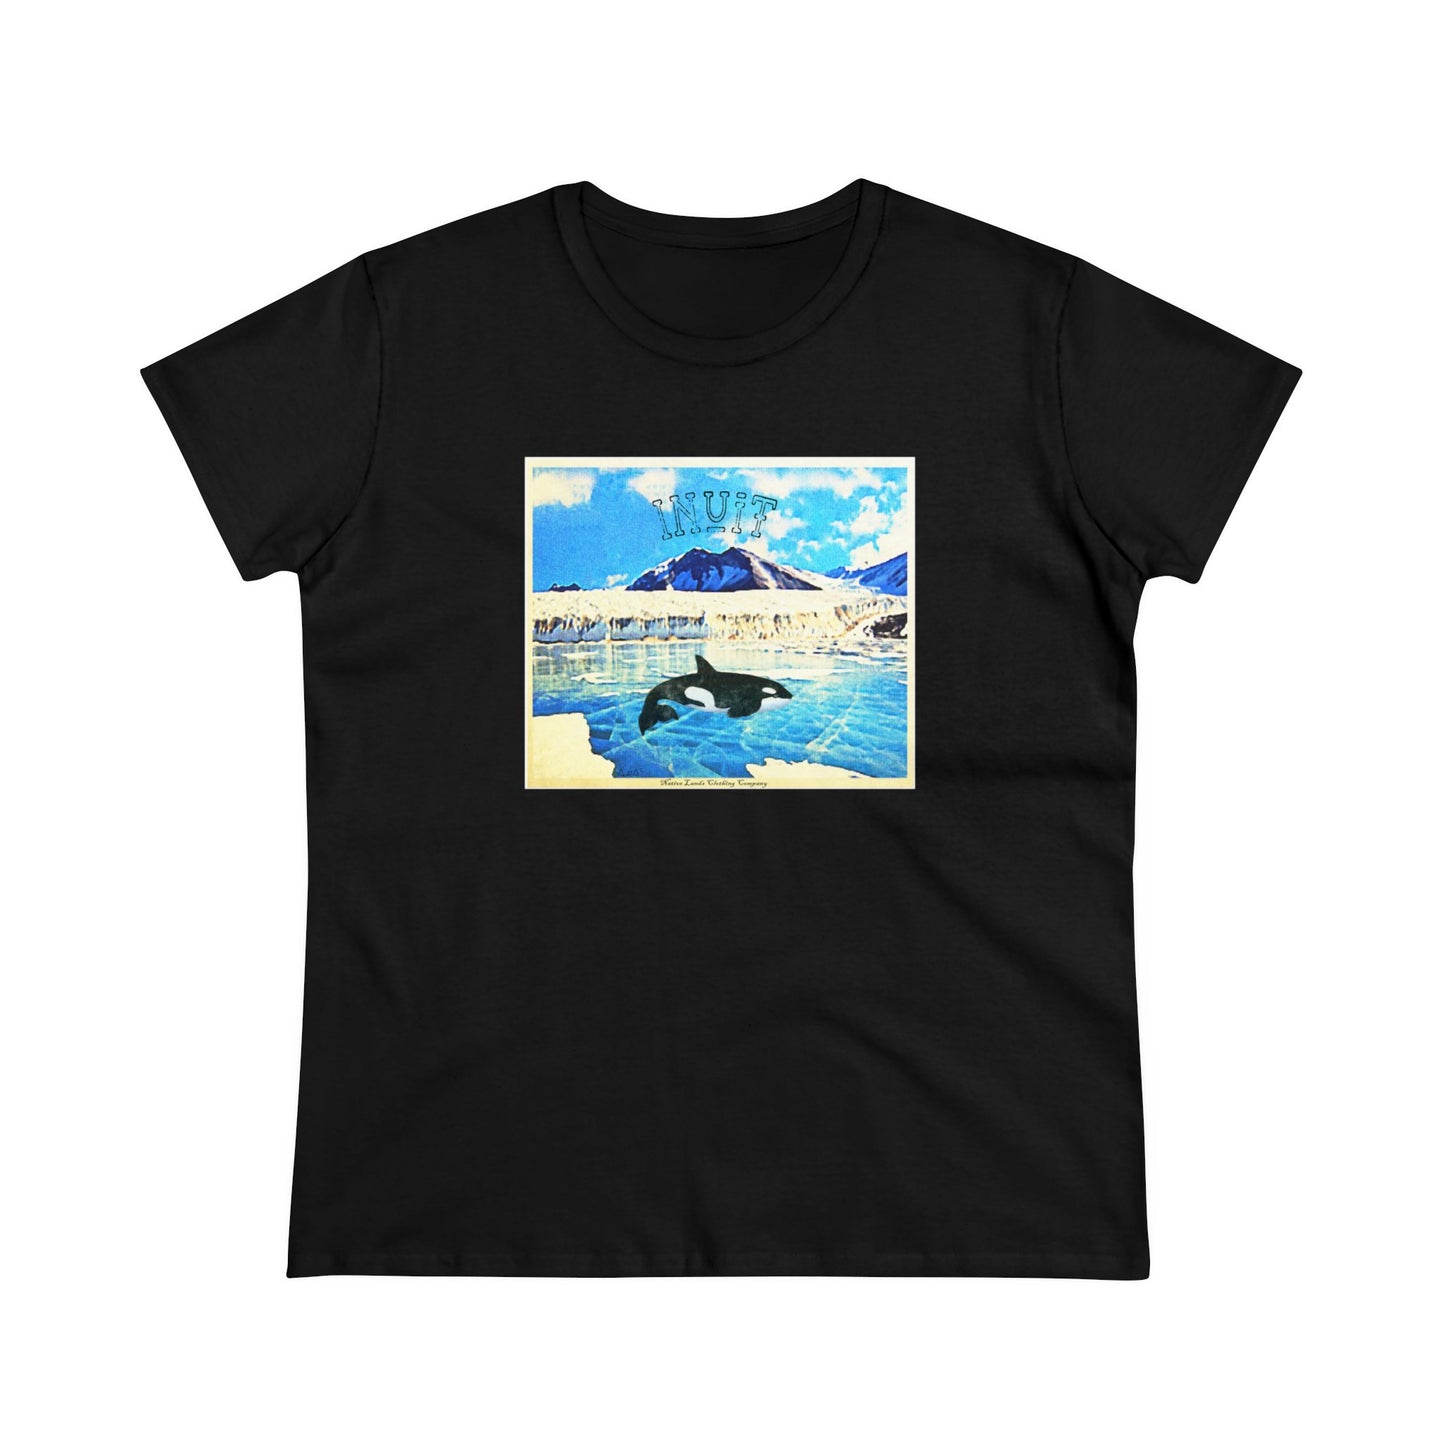 Womens Inuit Tribe Shirt Orca Cotton Native American